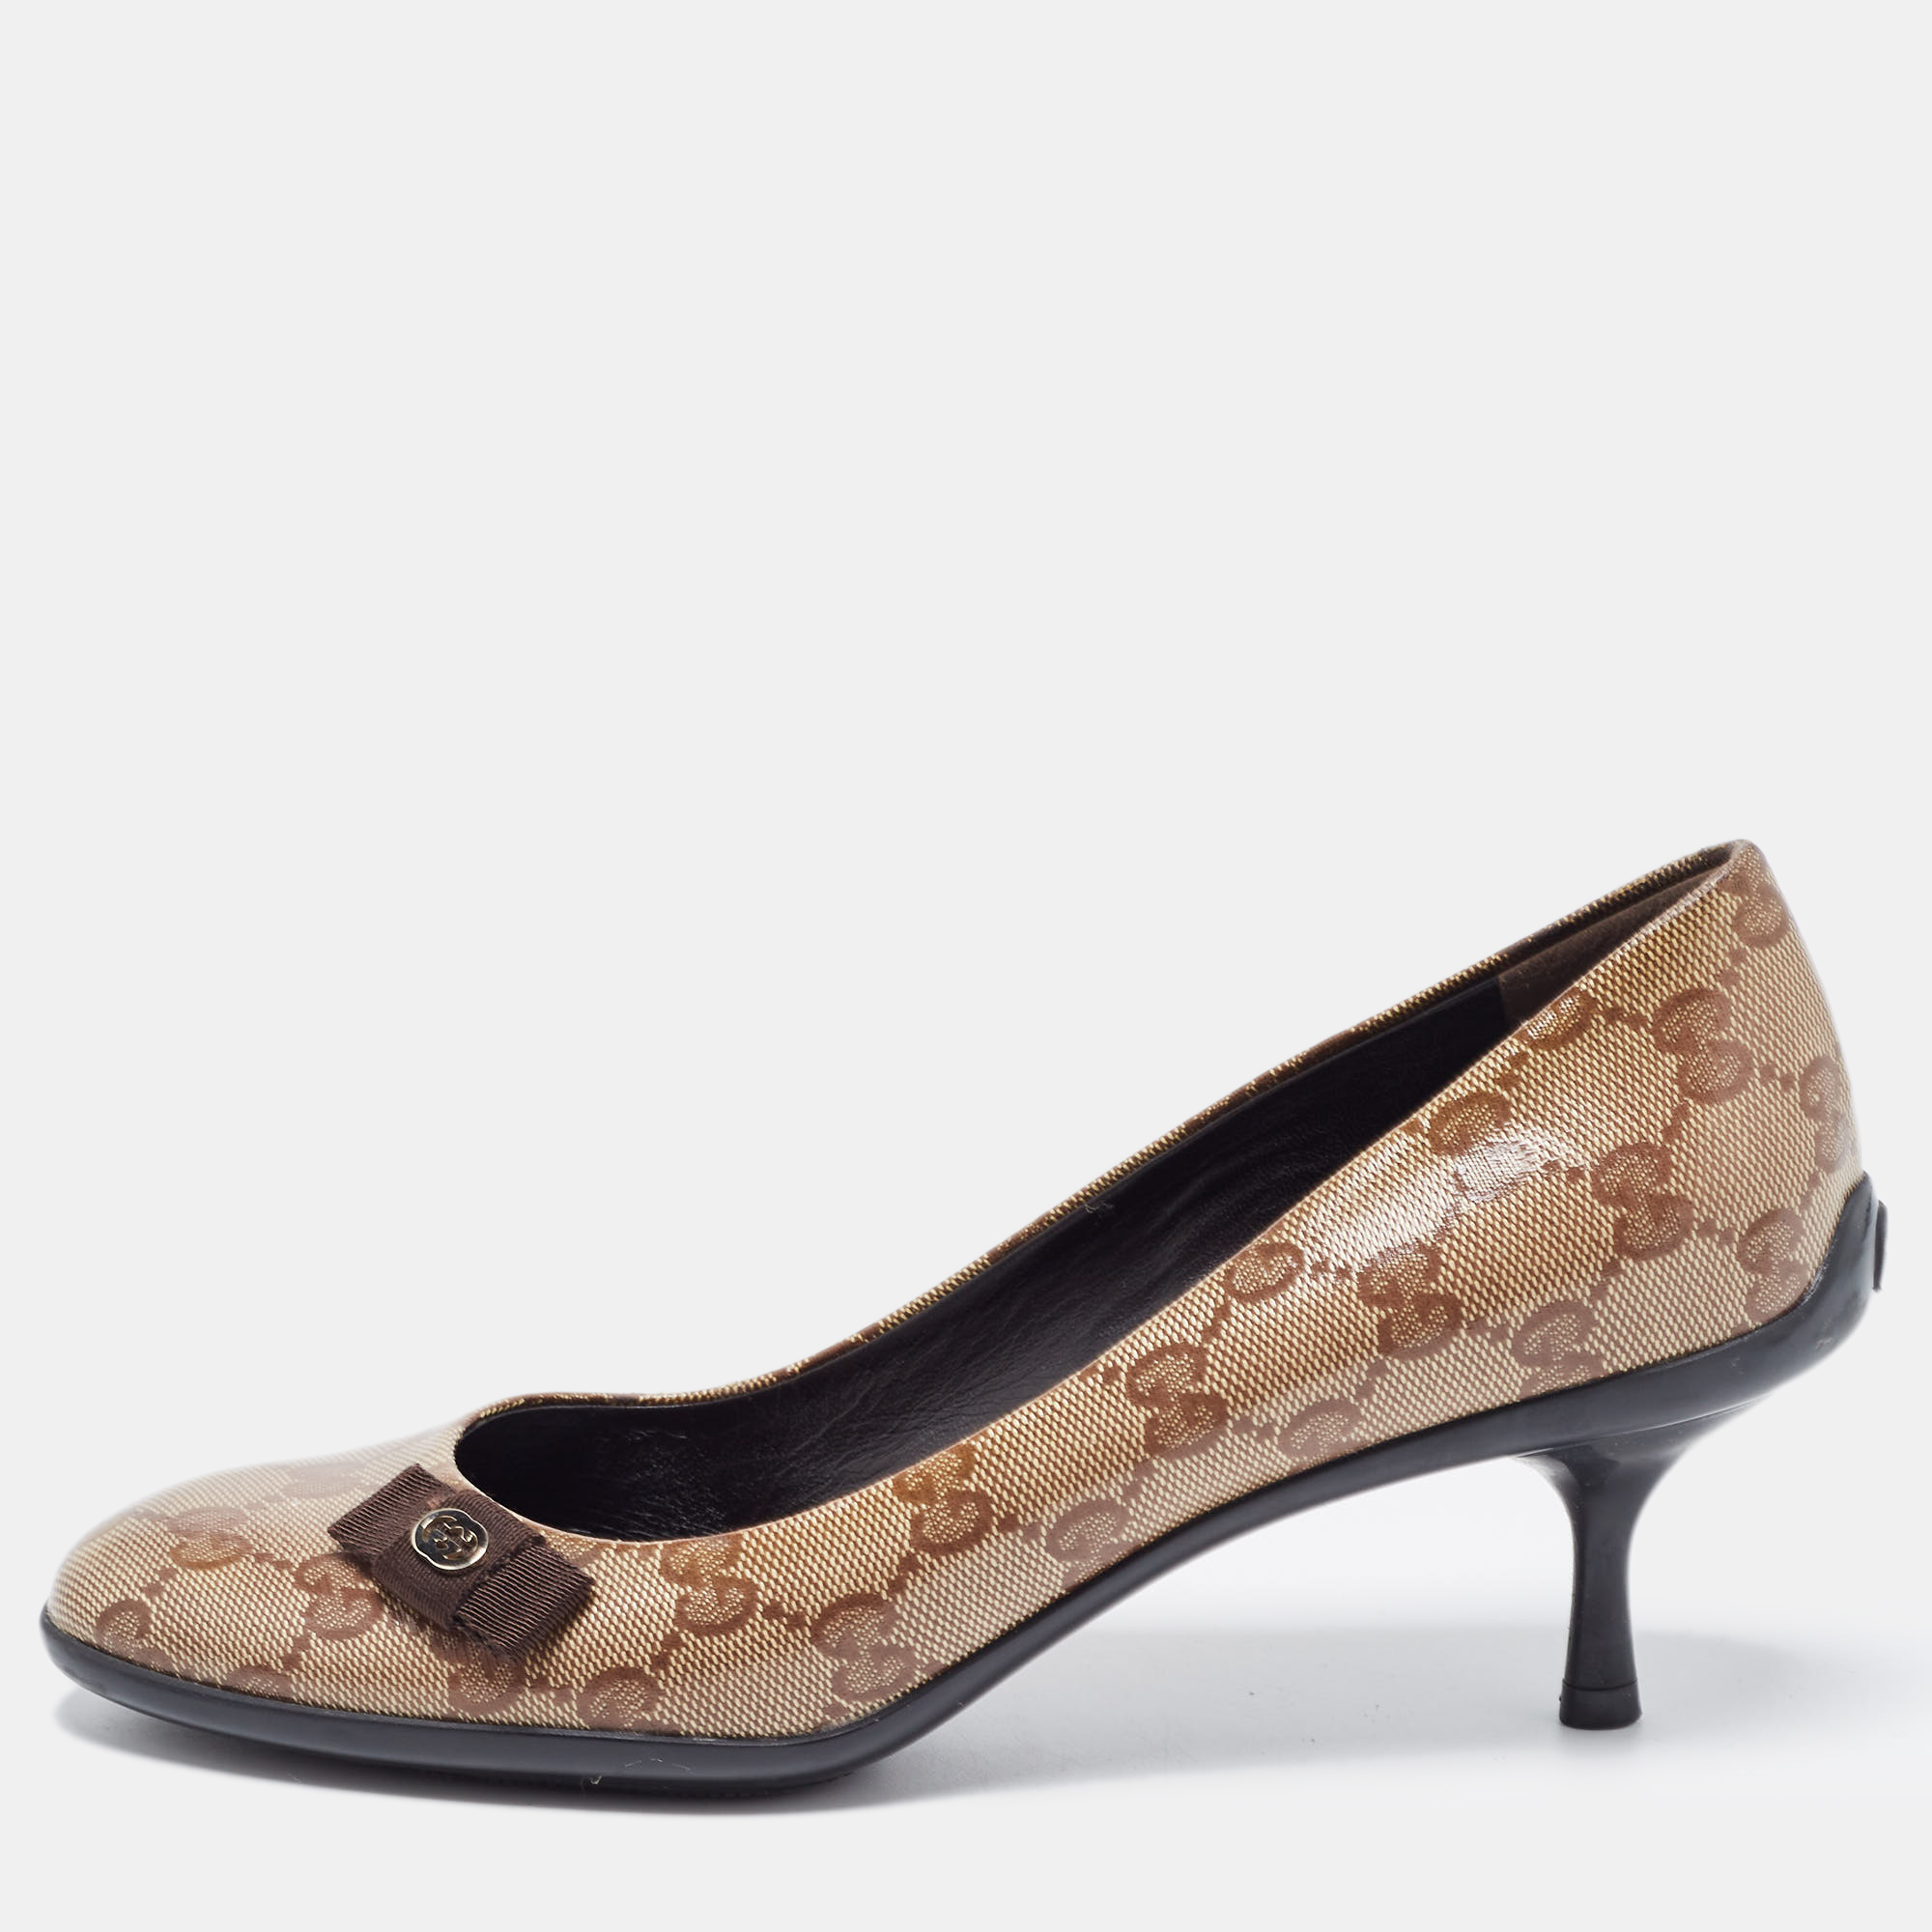 Gucci brown/beige gg crystal canvas bow round toe pumps size 36.5